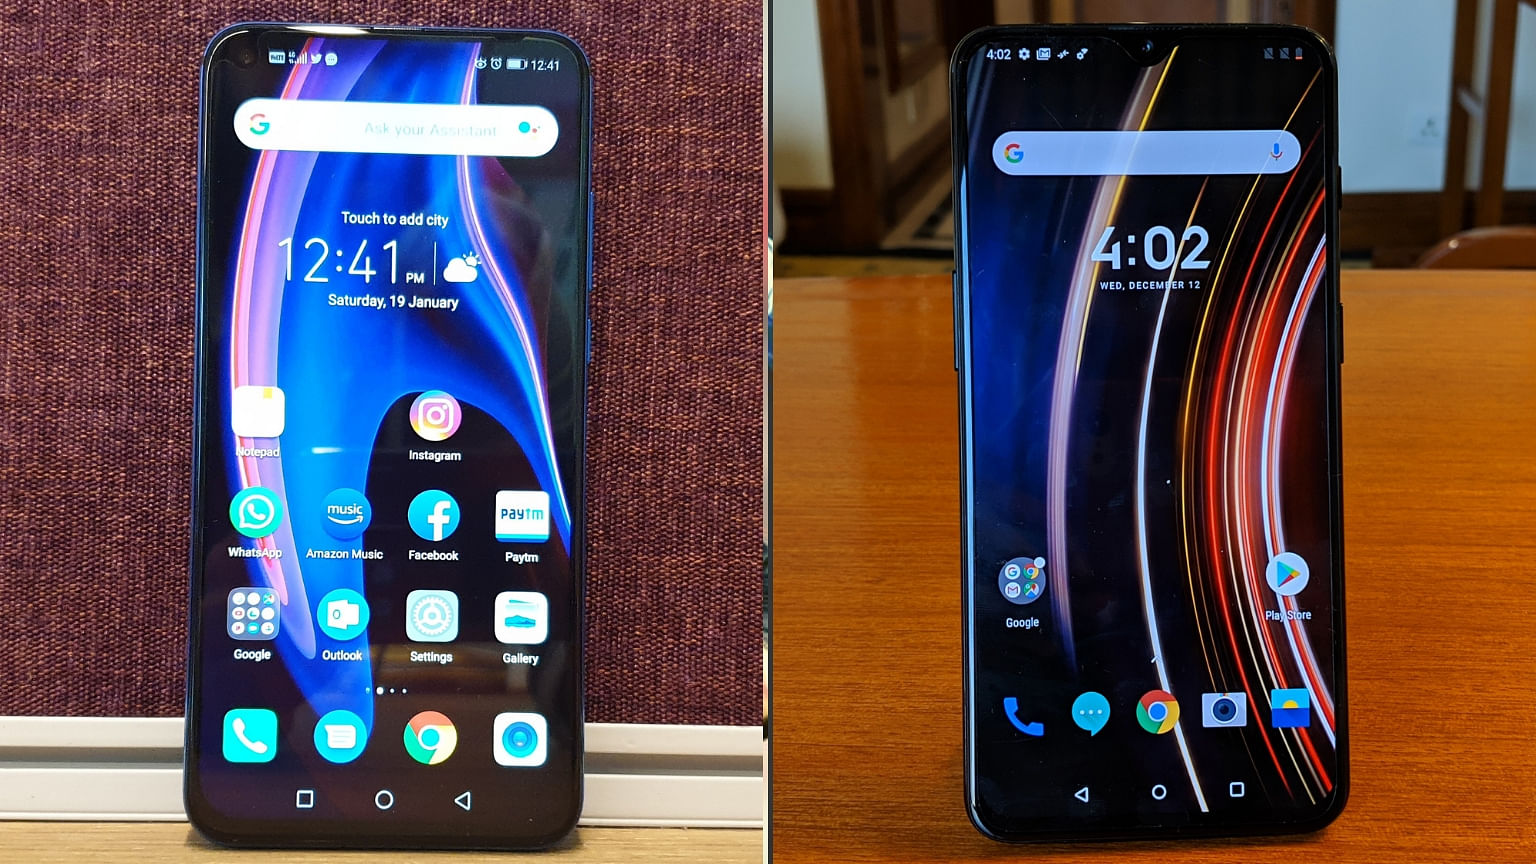 Honor View 20 (left) up against the OnePlus 6T (right).